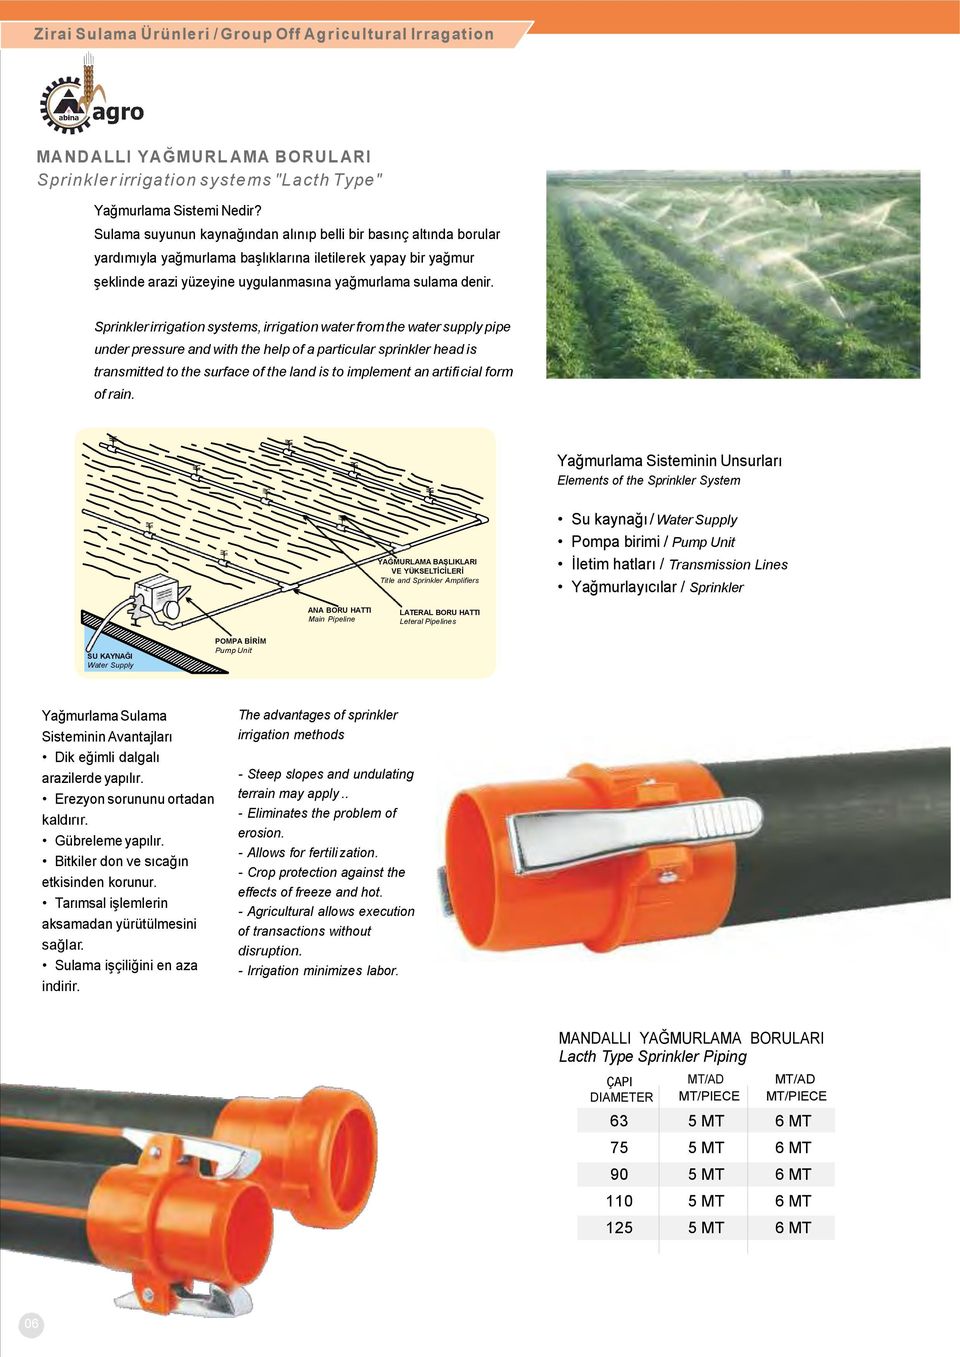 Sprinkler irrigation systems, irrigation water from the water supply pipe under pressure and with the help of a particular sprinkler head is transmitted to the surface of the land is to implement an